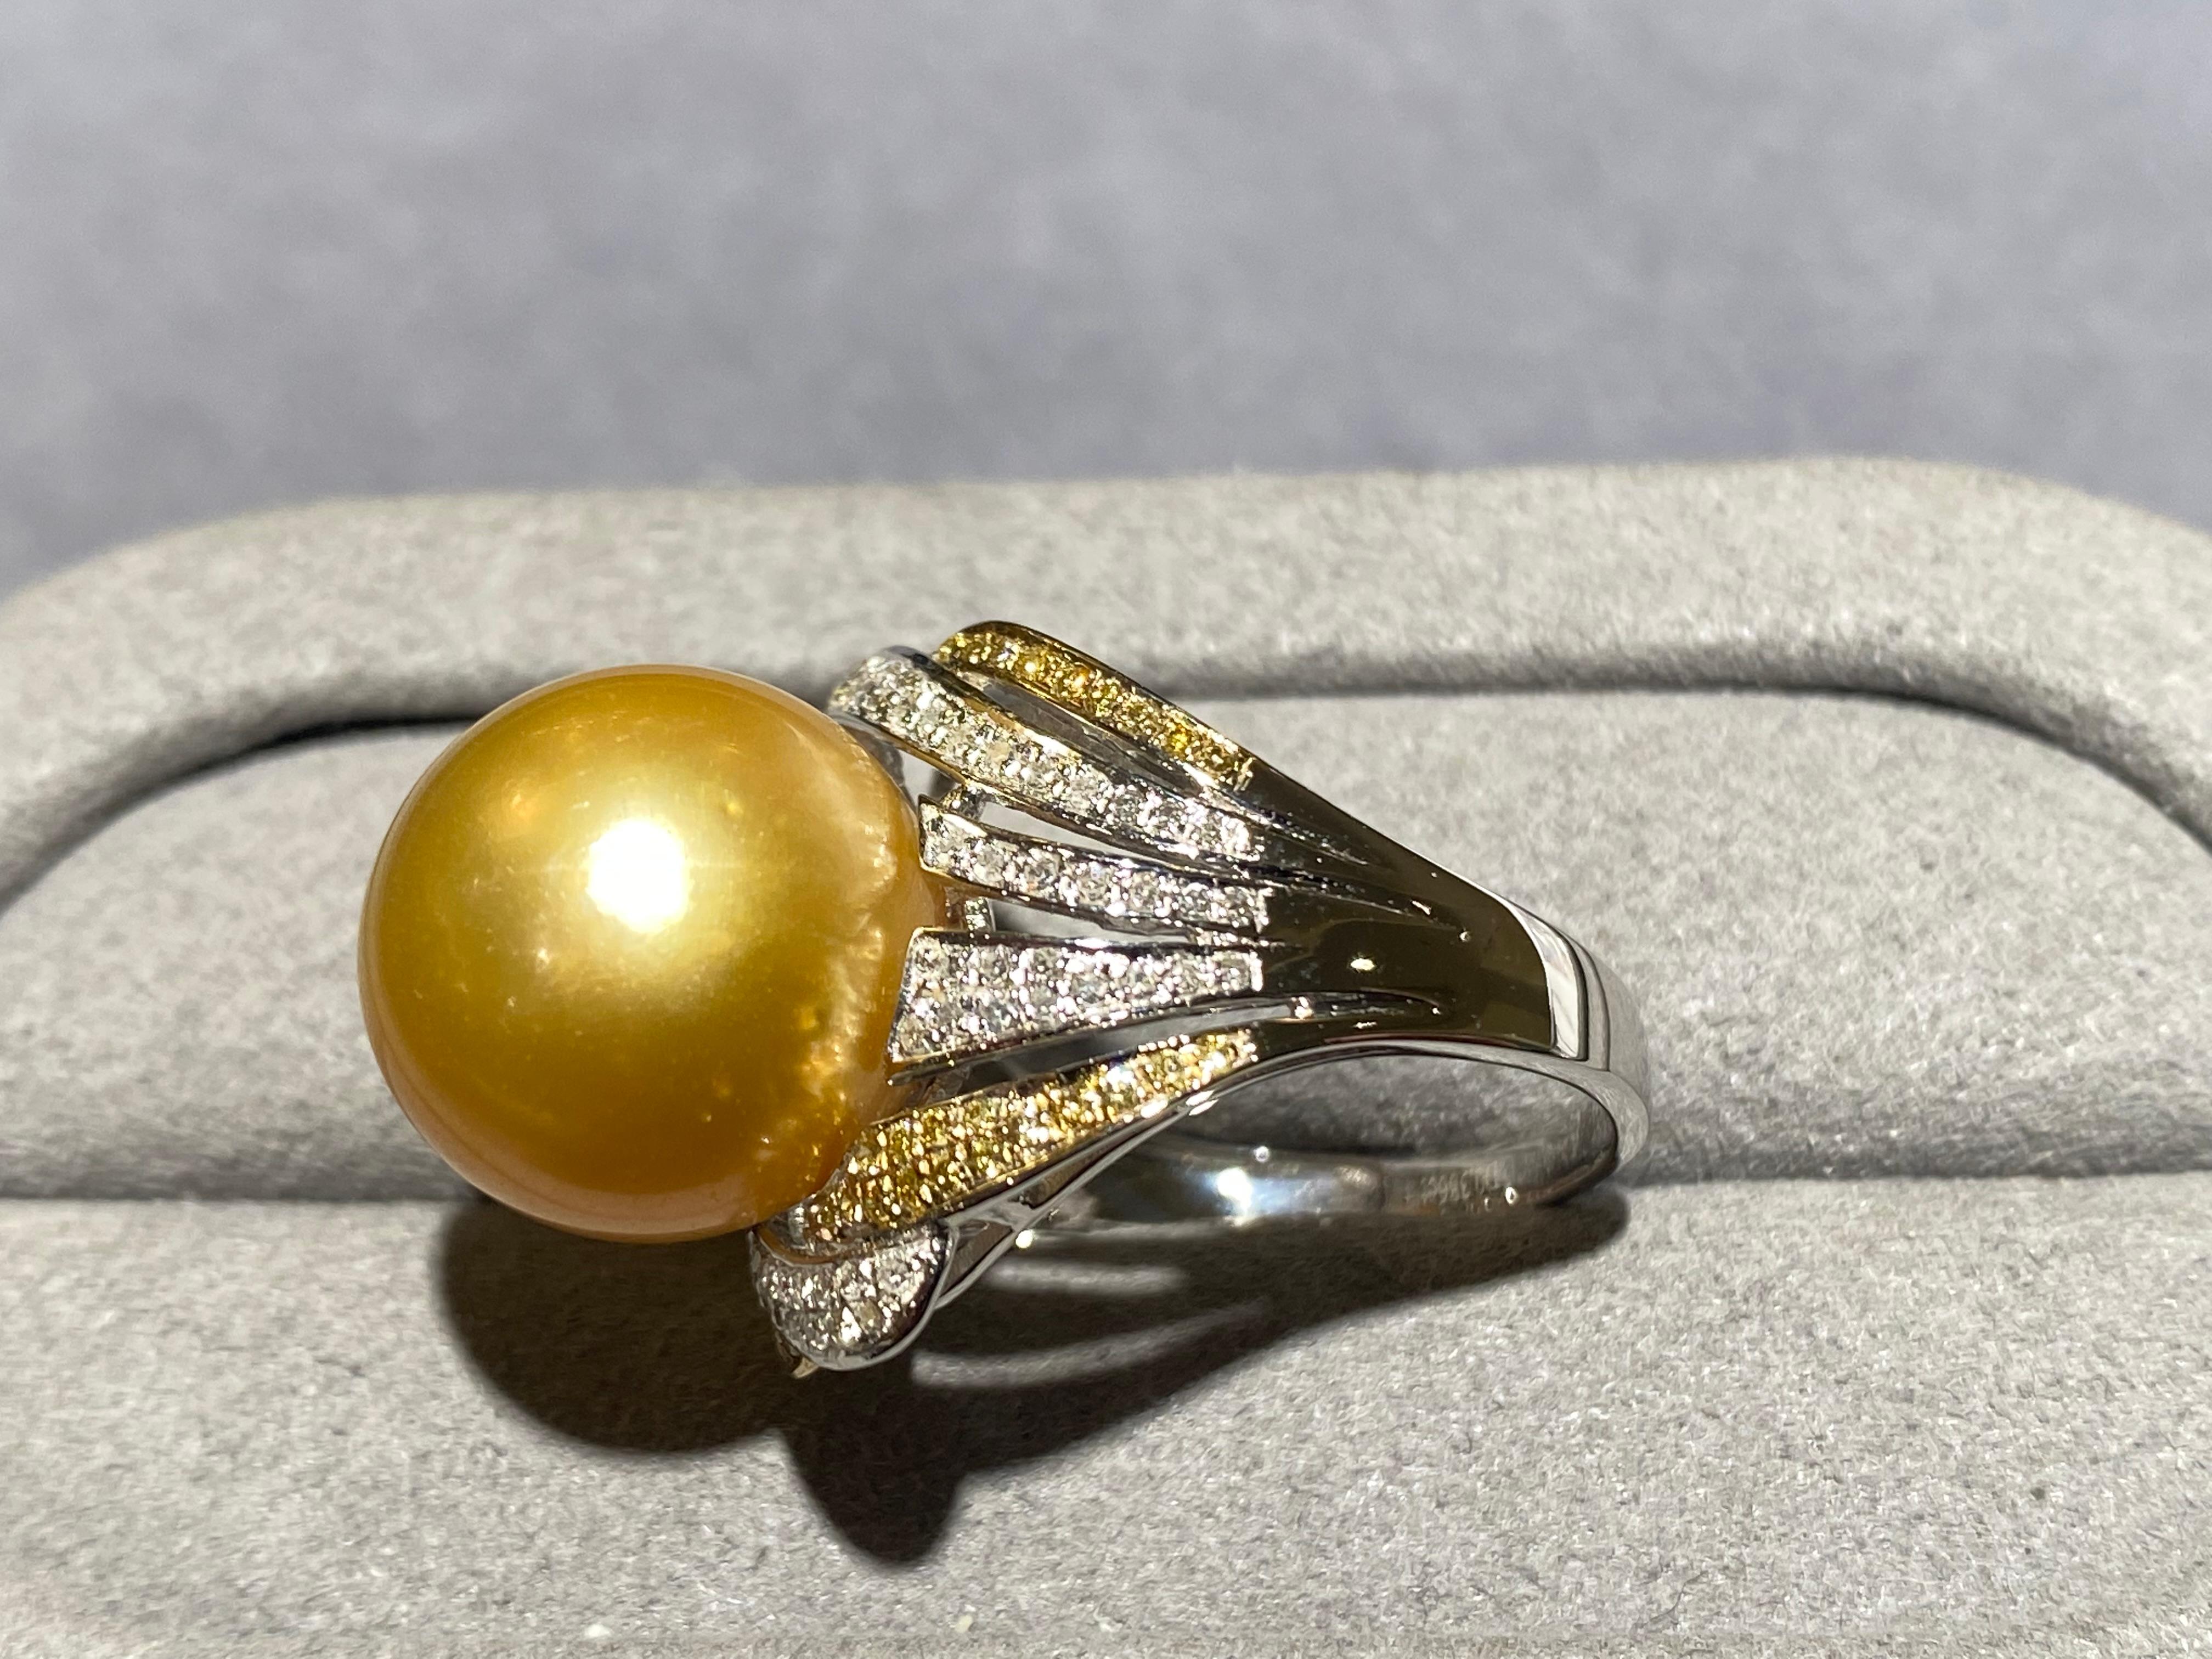 A round  13.5 mm golden colour south sea pearl and diamond ring in 18k white gold. The ring band underneath the south sea pearl is ribbon-like and set with diamond pave. The ribbons are alternating between yellow and white colour. This ring is